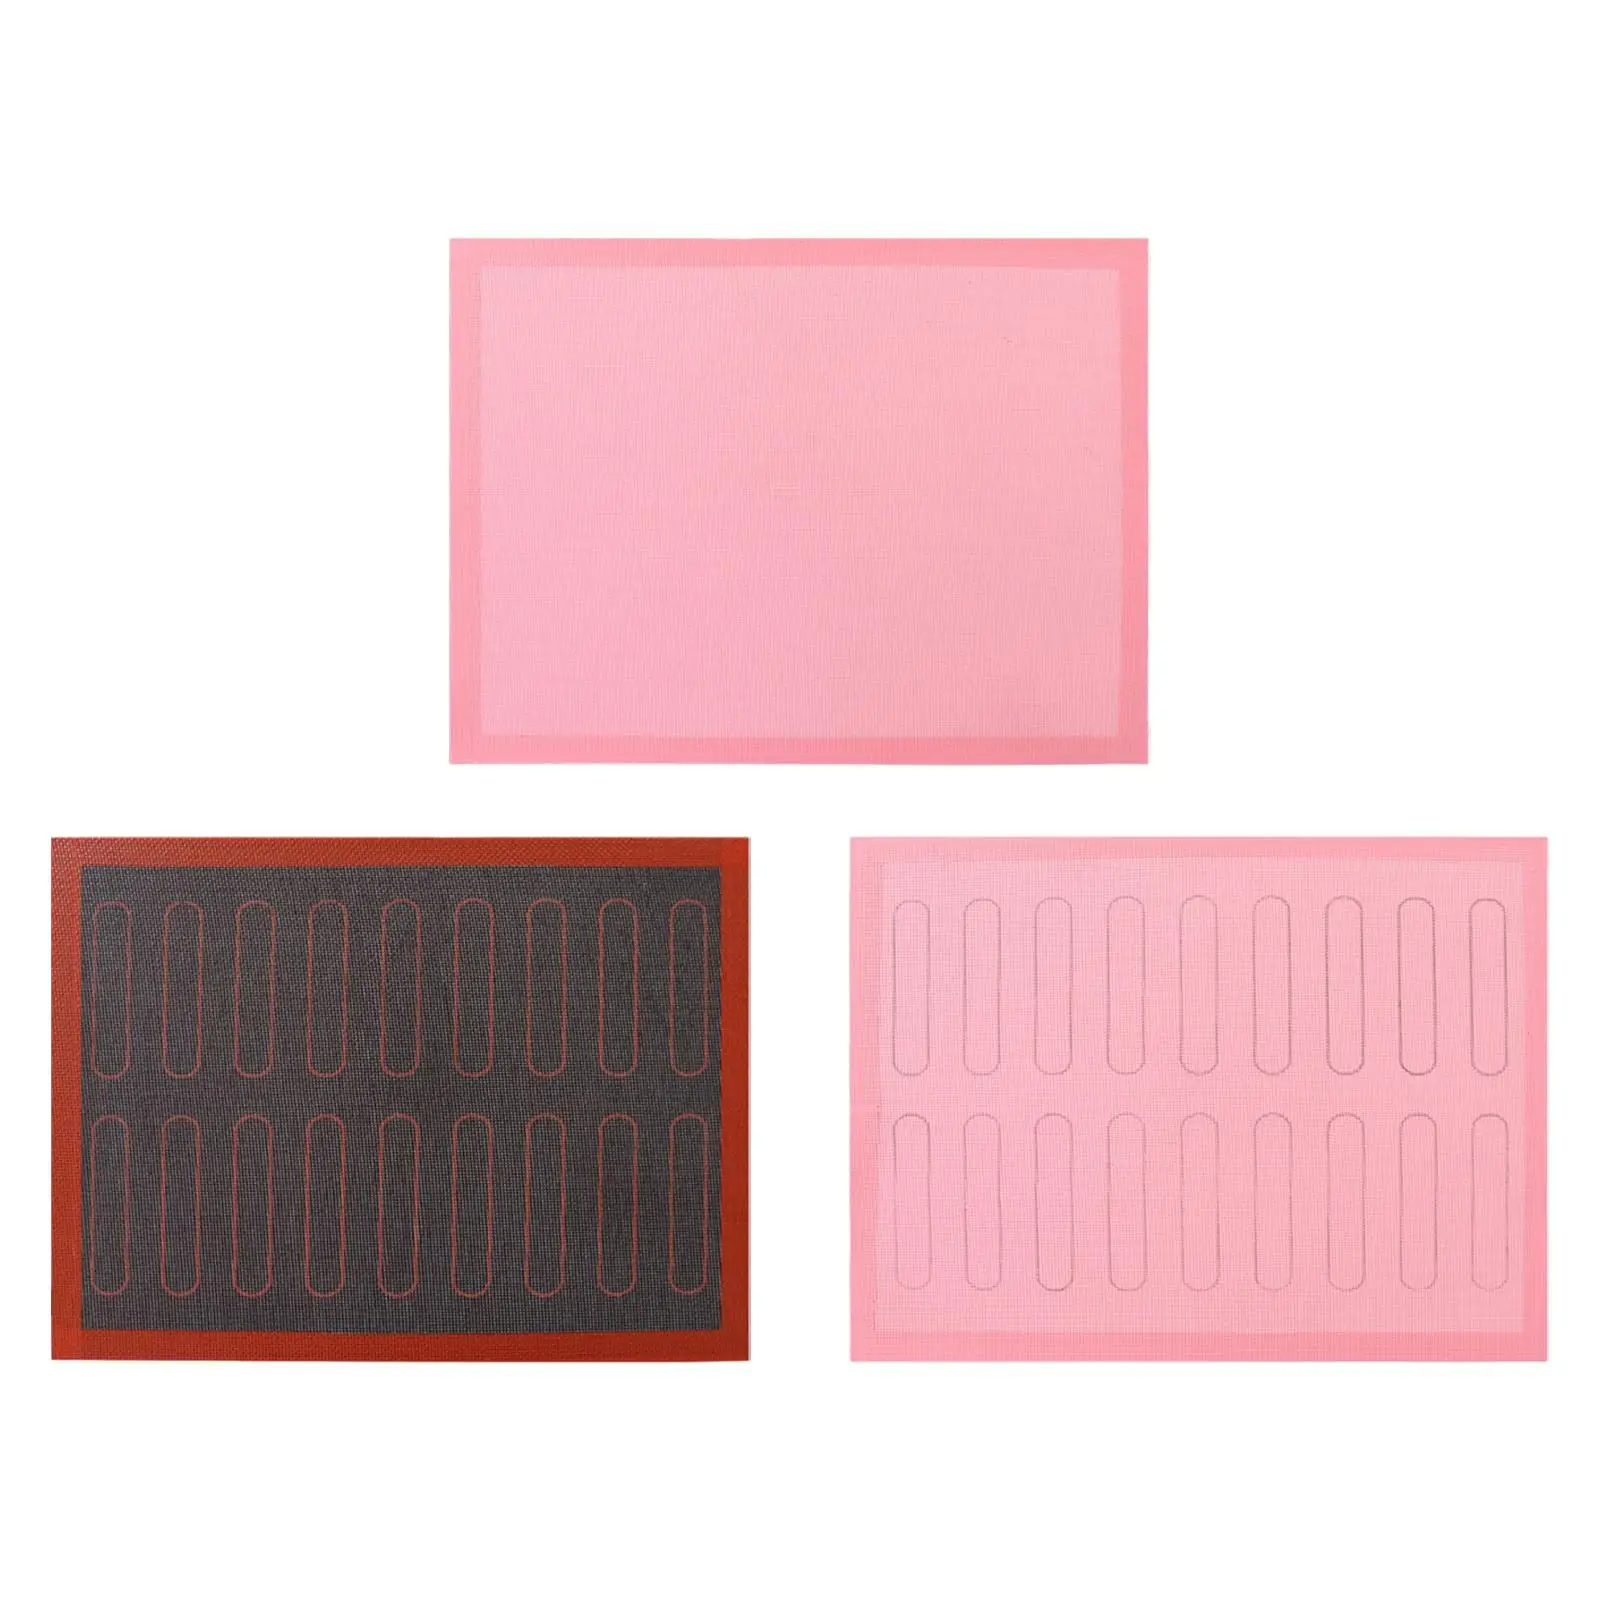 Silicone Baking Sheet Reusable Cake Pan Mat Oven Liner Bread Making Tools Baking Mat for Kitchen Dining Room Home